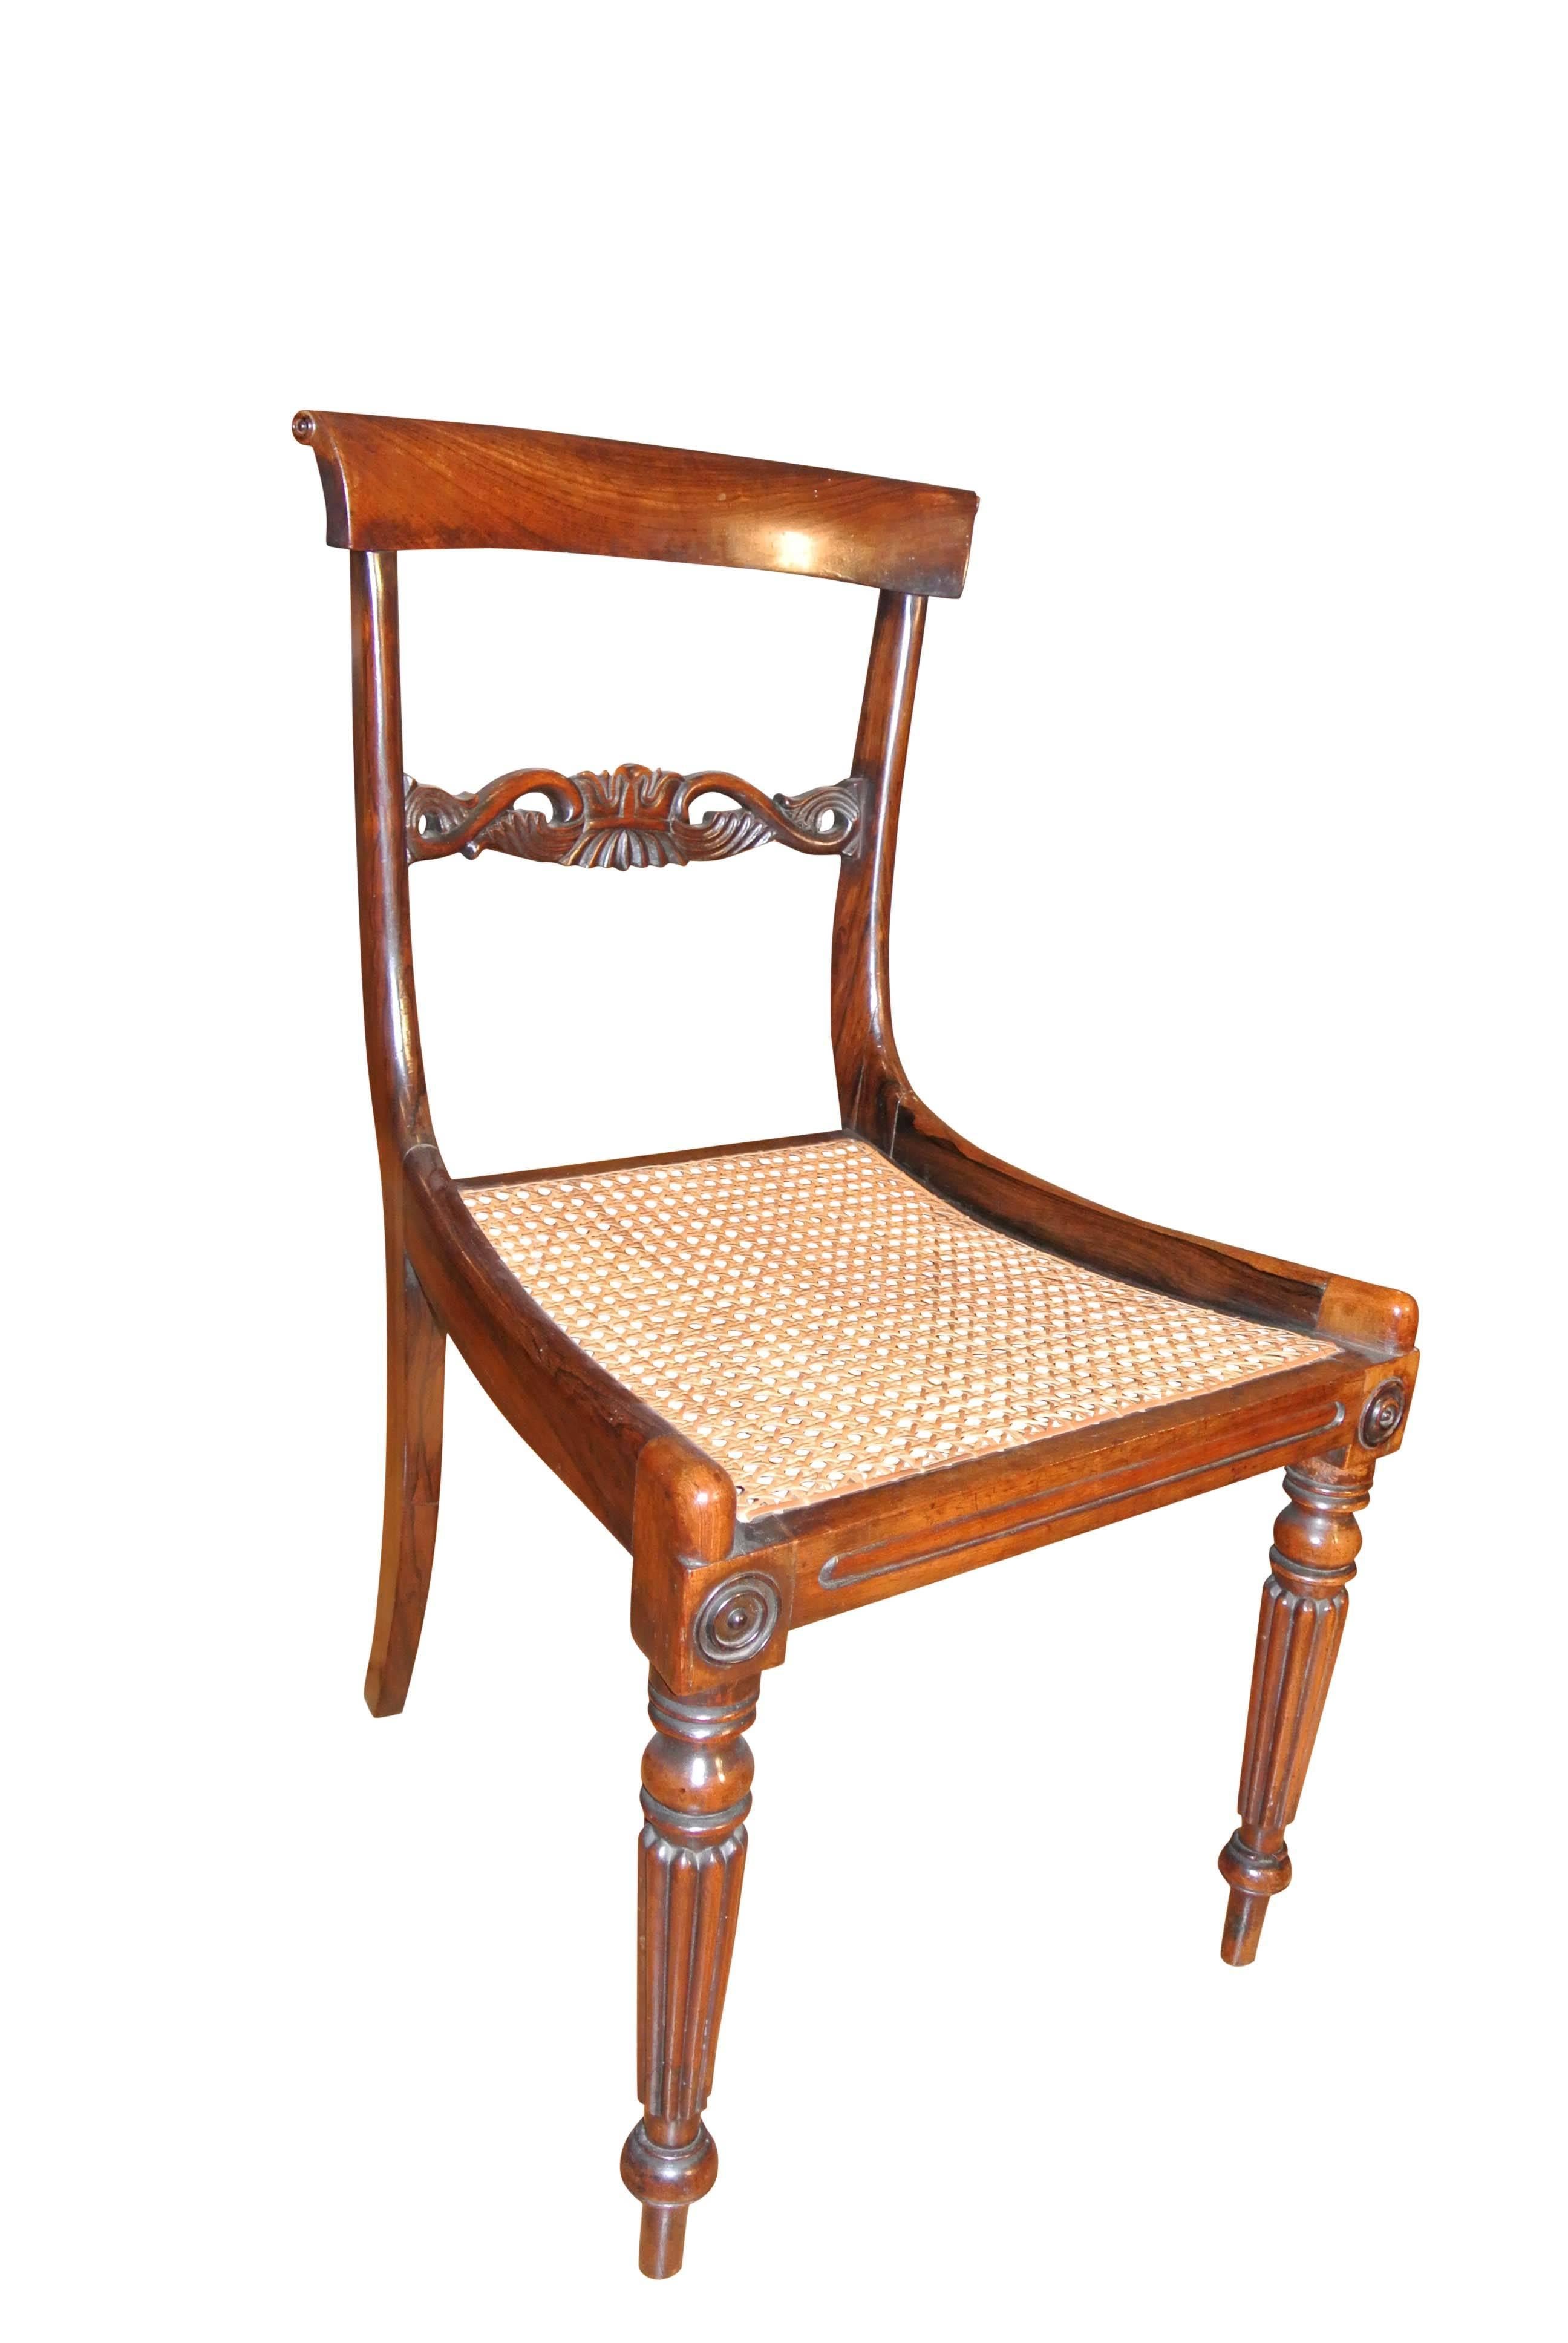 Early 19th Century 19th Century Regency Rosewood Dining Chairs